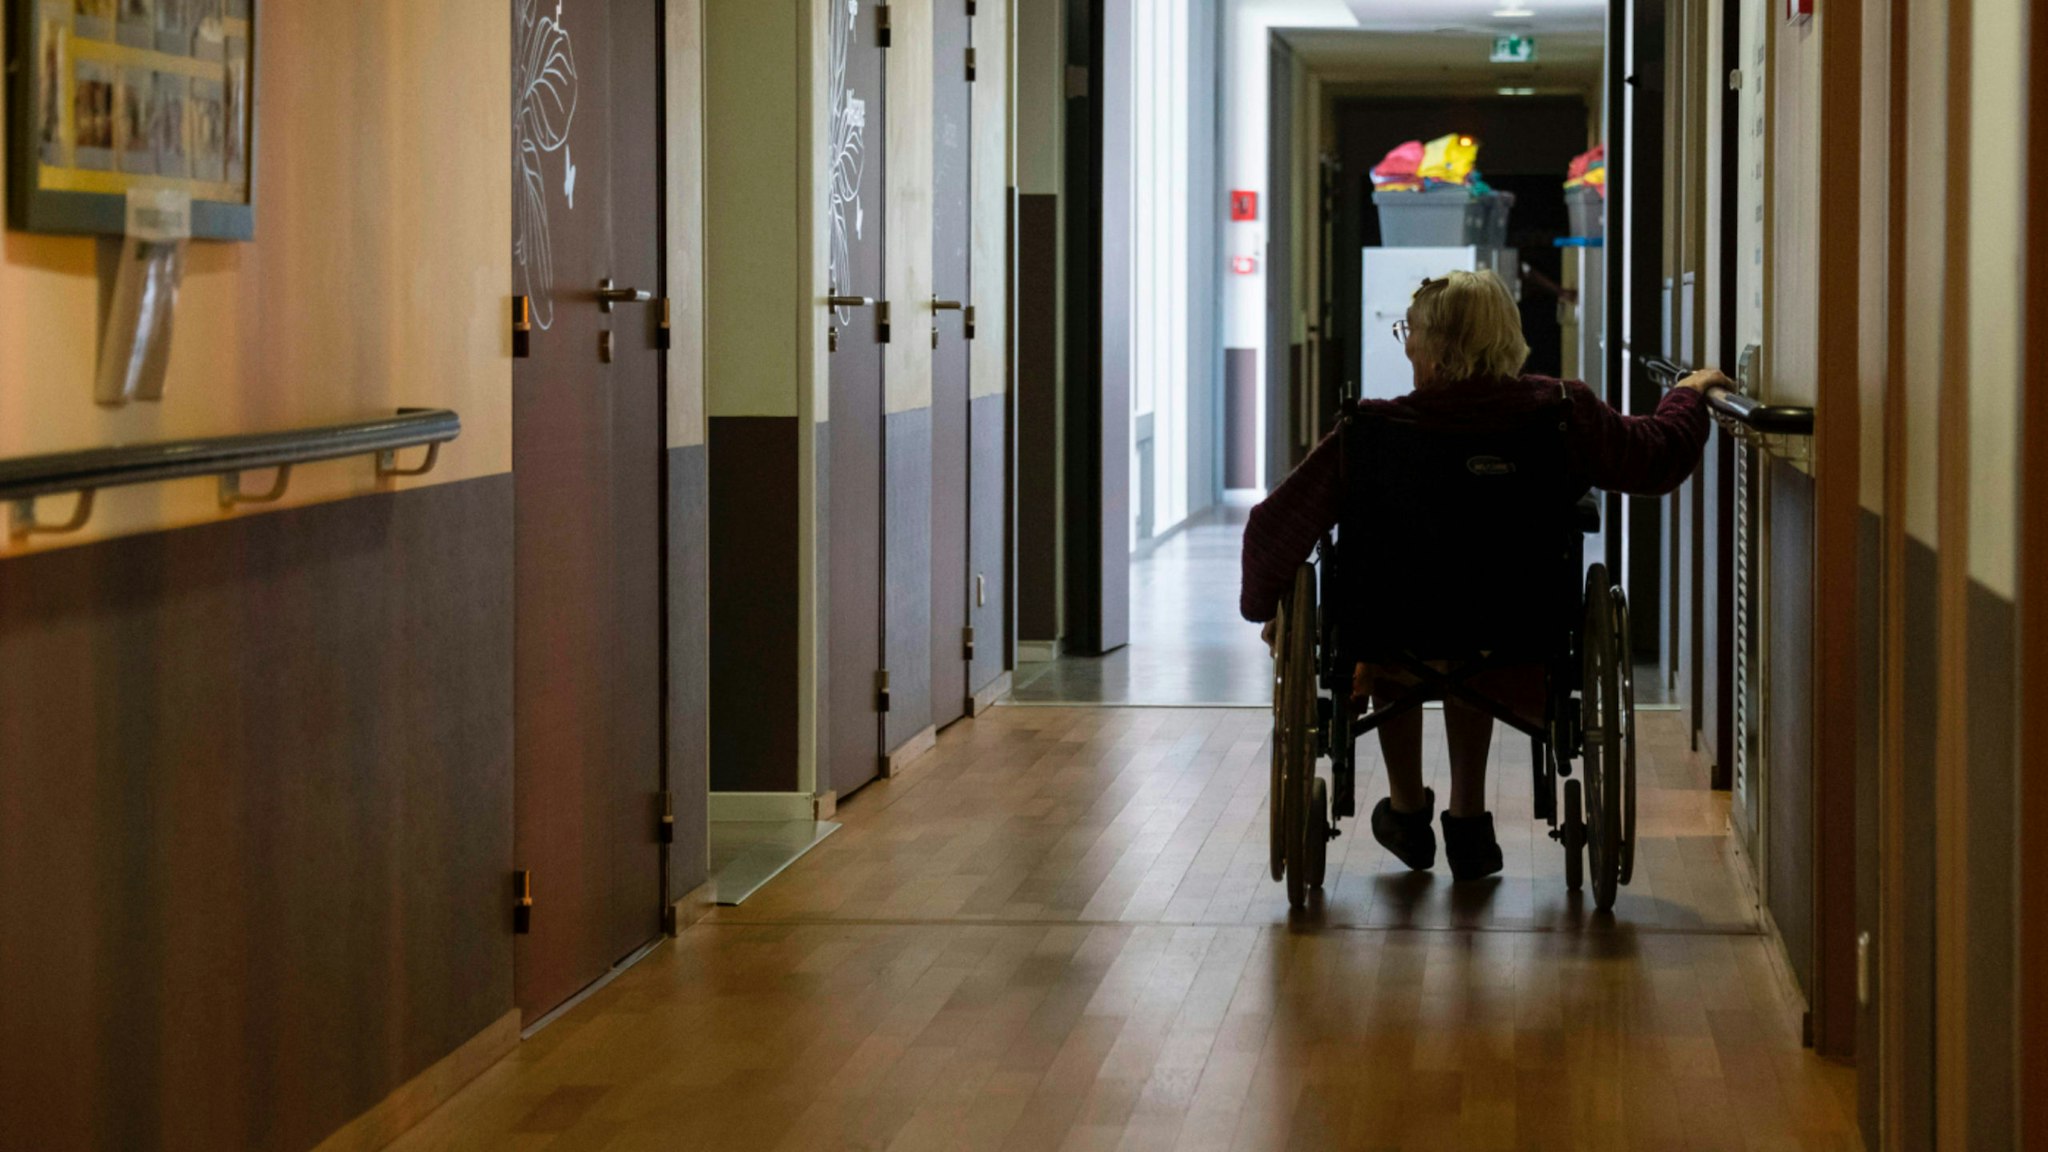 A resident of the Les Flaxinelles EHPAD (Housing Establishment for Dependant Elderly People) in Bergheim, eastern France, rides her wheelchair on April 14, 2020 during the 29th day of a strict confinement in France aimed at curbing the COVID-19 disease caused by the novel coronavirus.